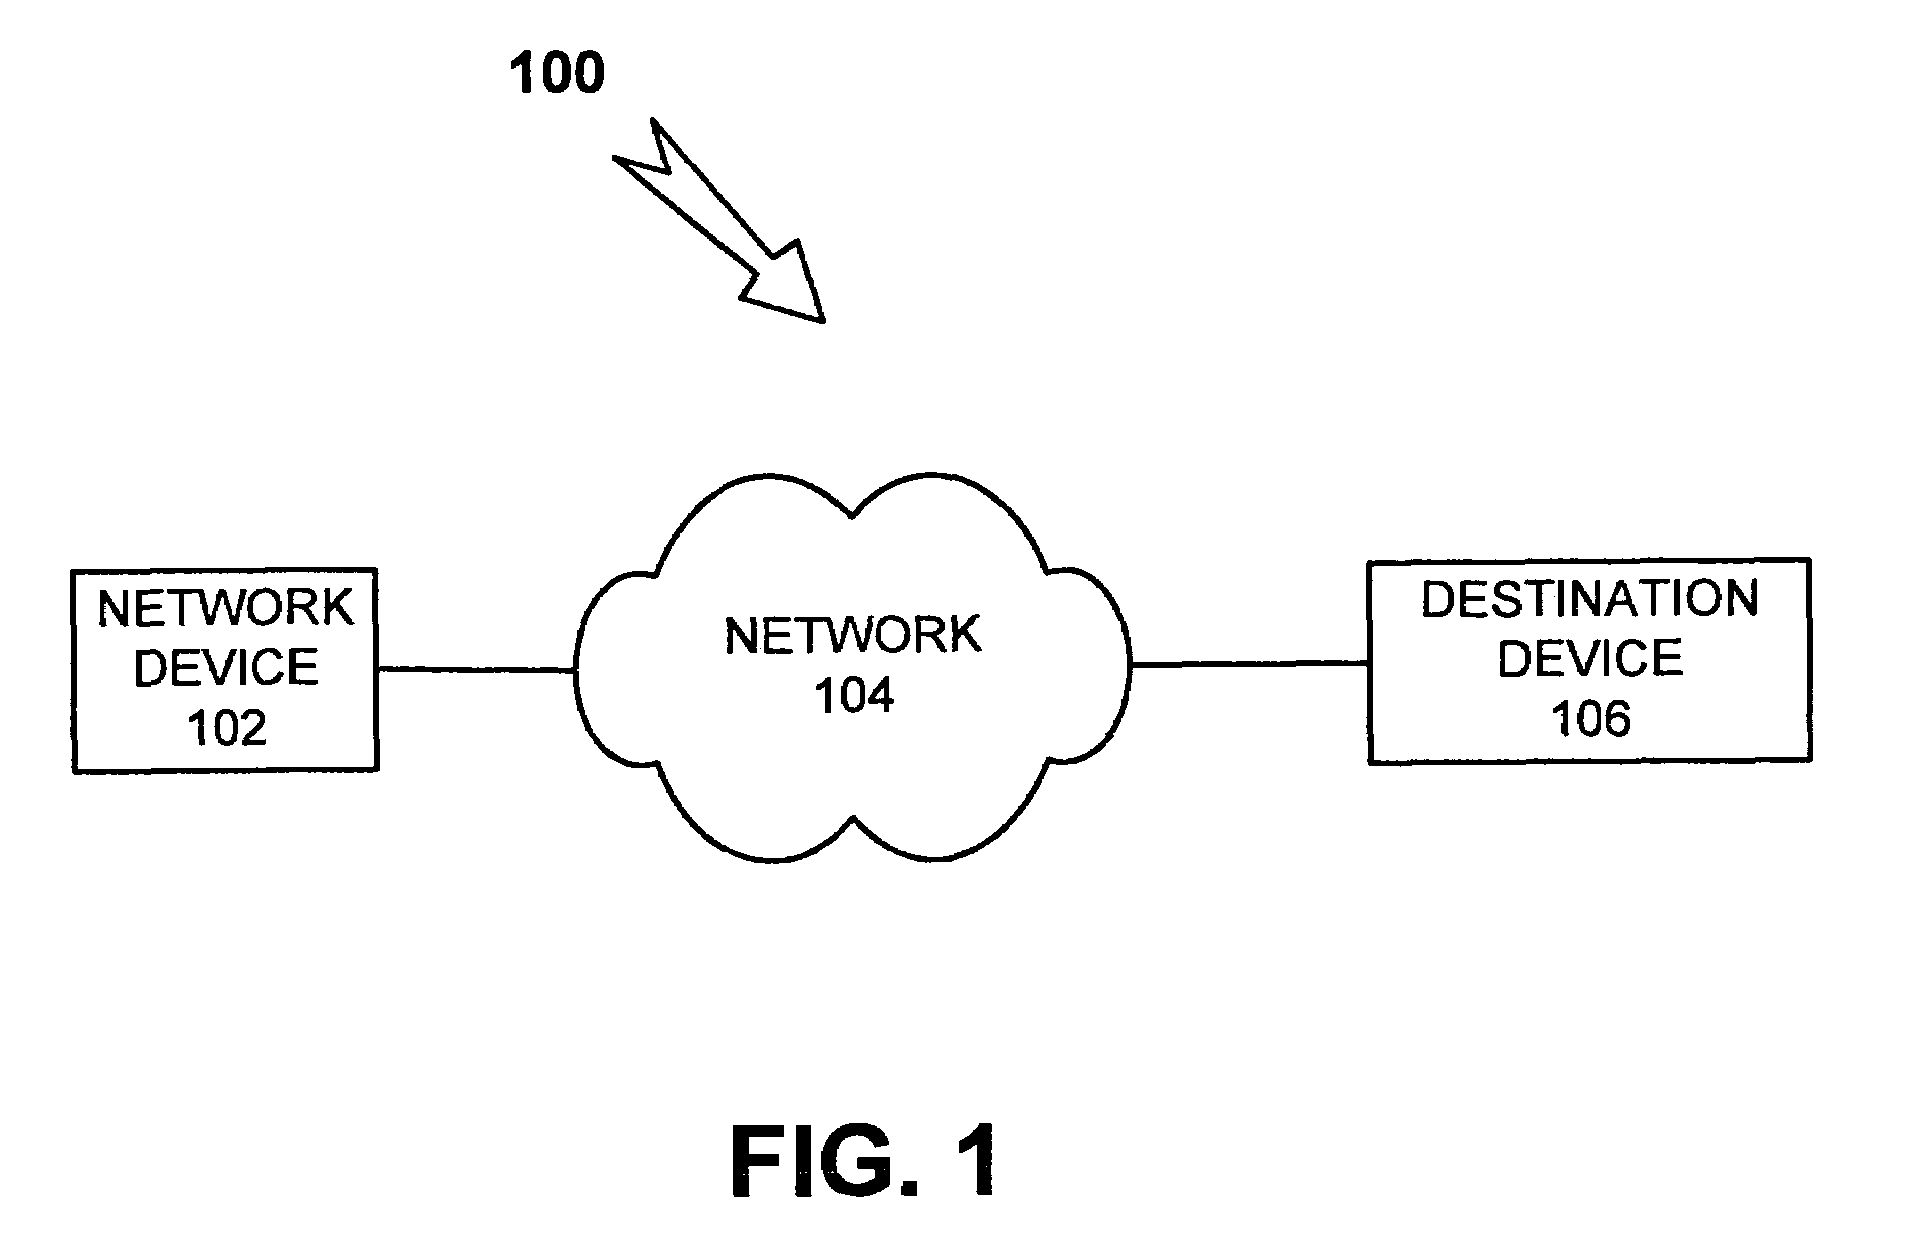 Shared shaping of network traffic